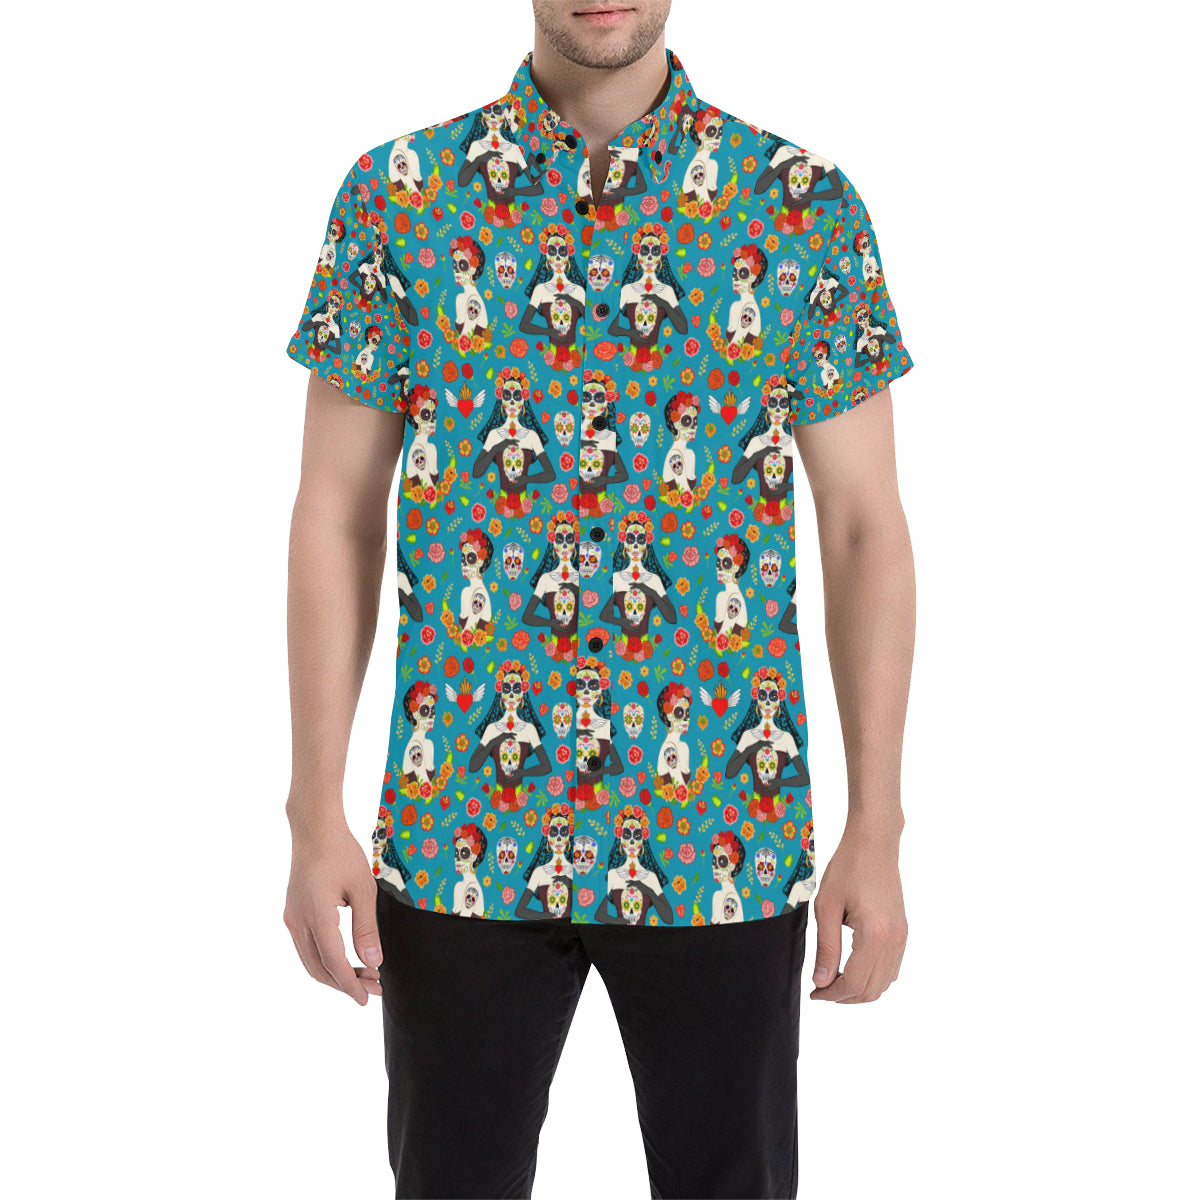 Day of the Dead Old School Girl Design Men's Short Sleeve Button Up Shirt